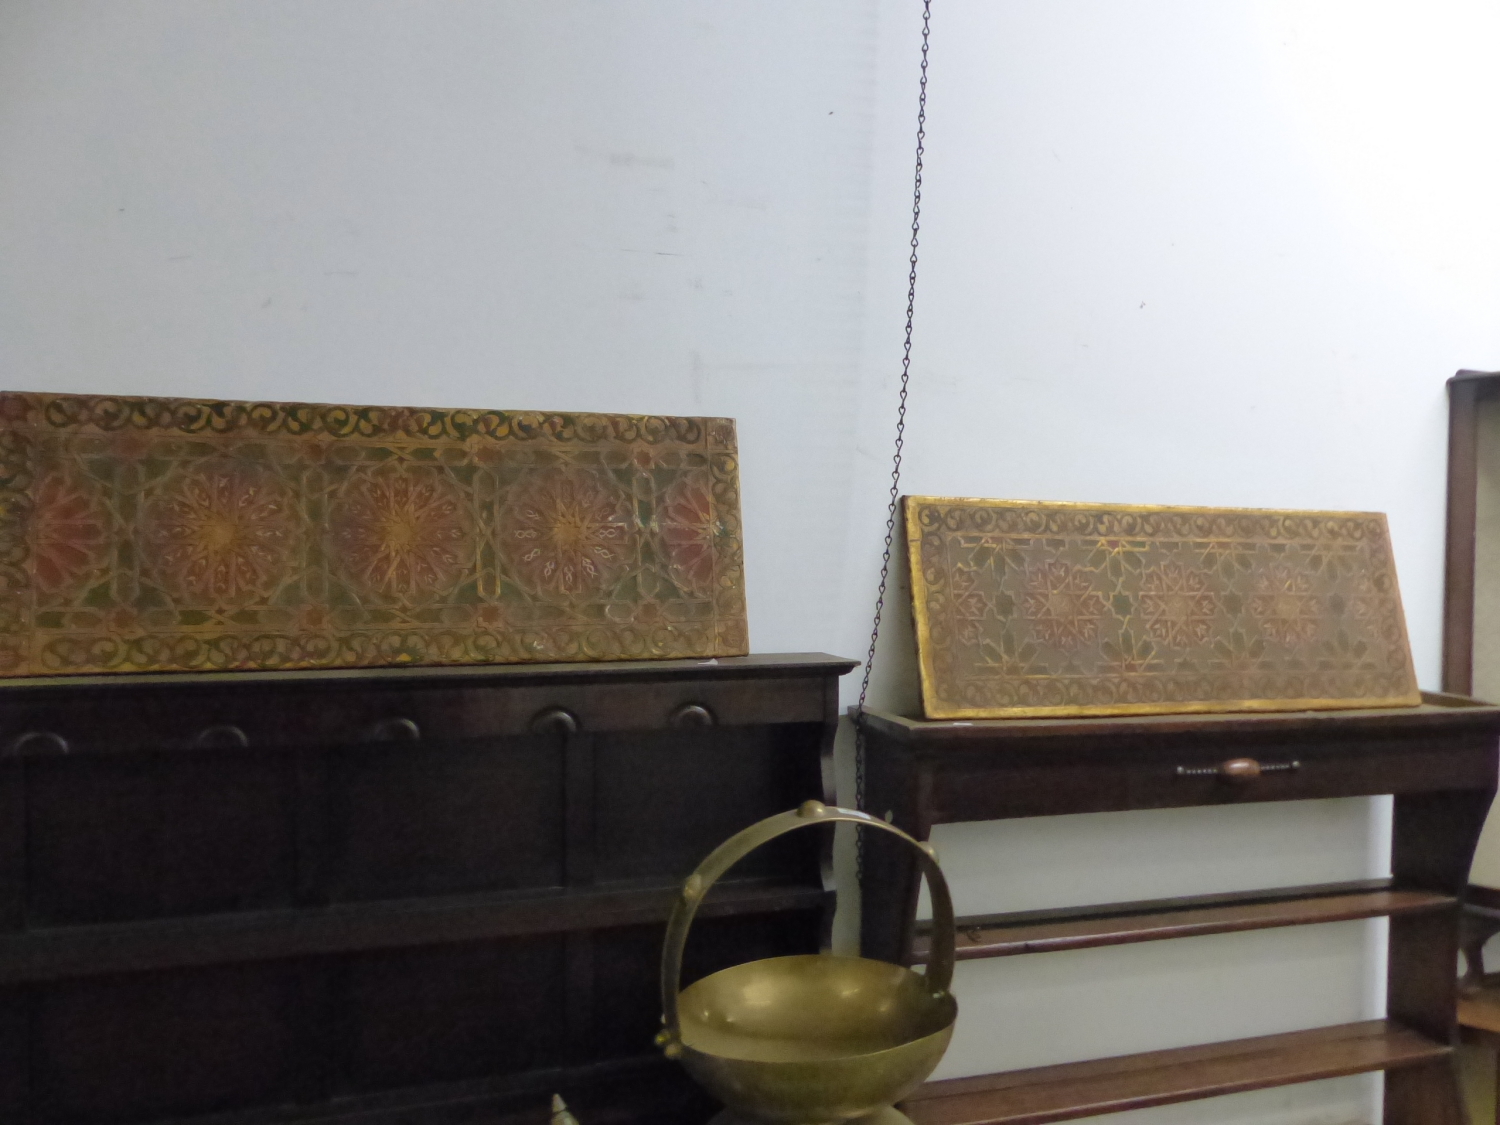 TWO SIMILAR HAND PAINTED EMBOSSED LEATHER ARTS AND CRAFTS PANELS.